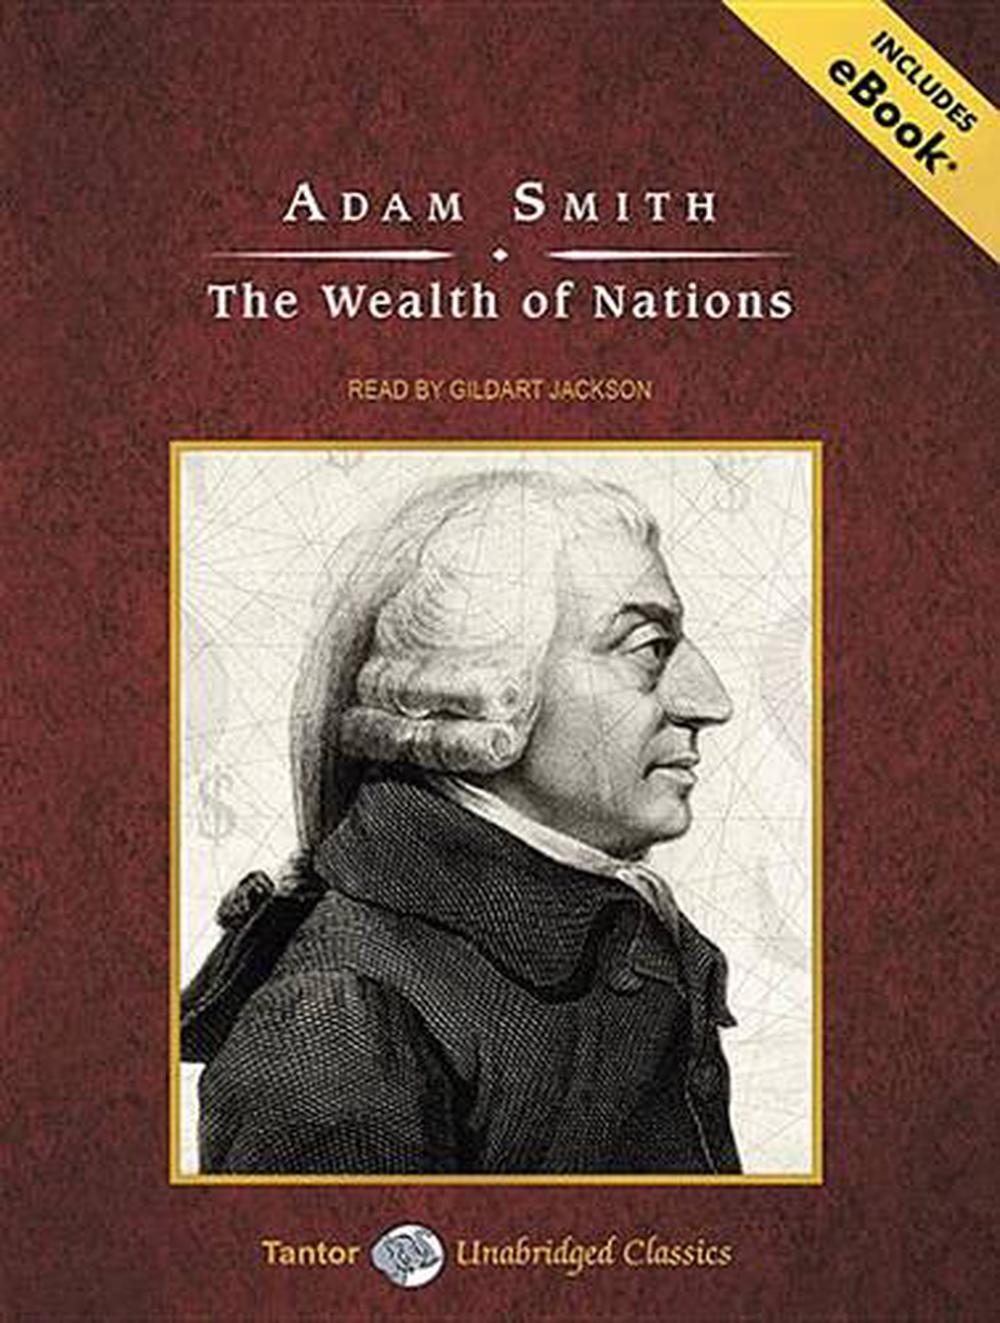 adam smith invisible hand wealth of nations pdf